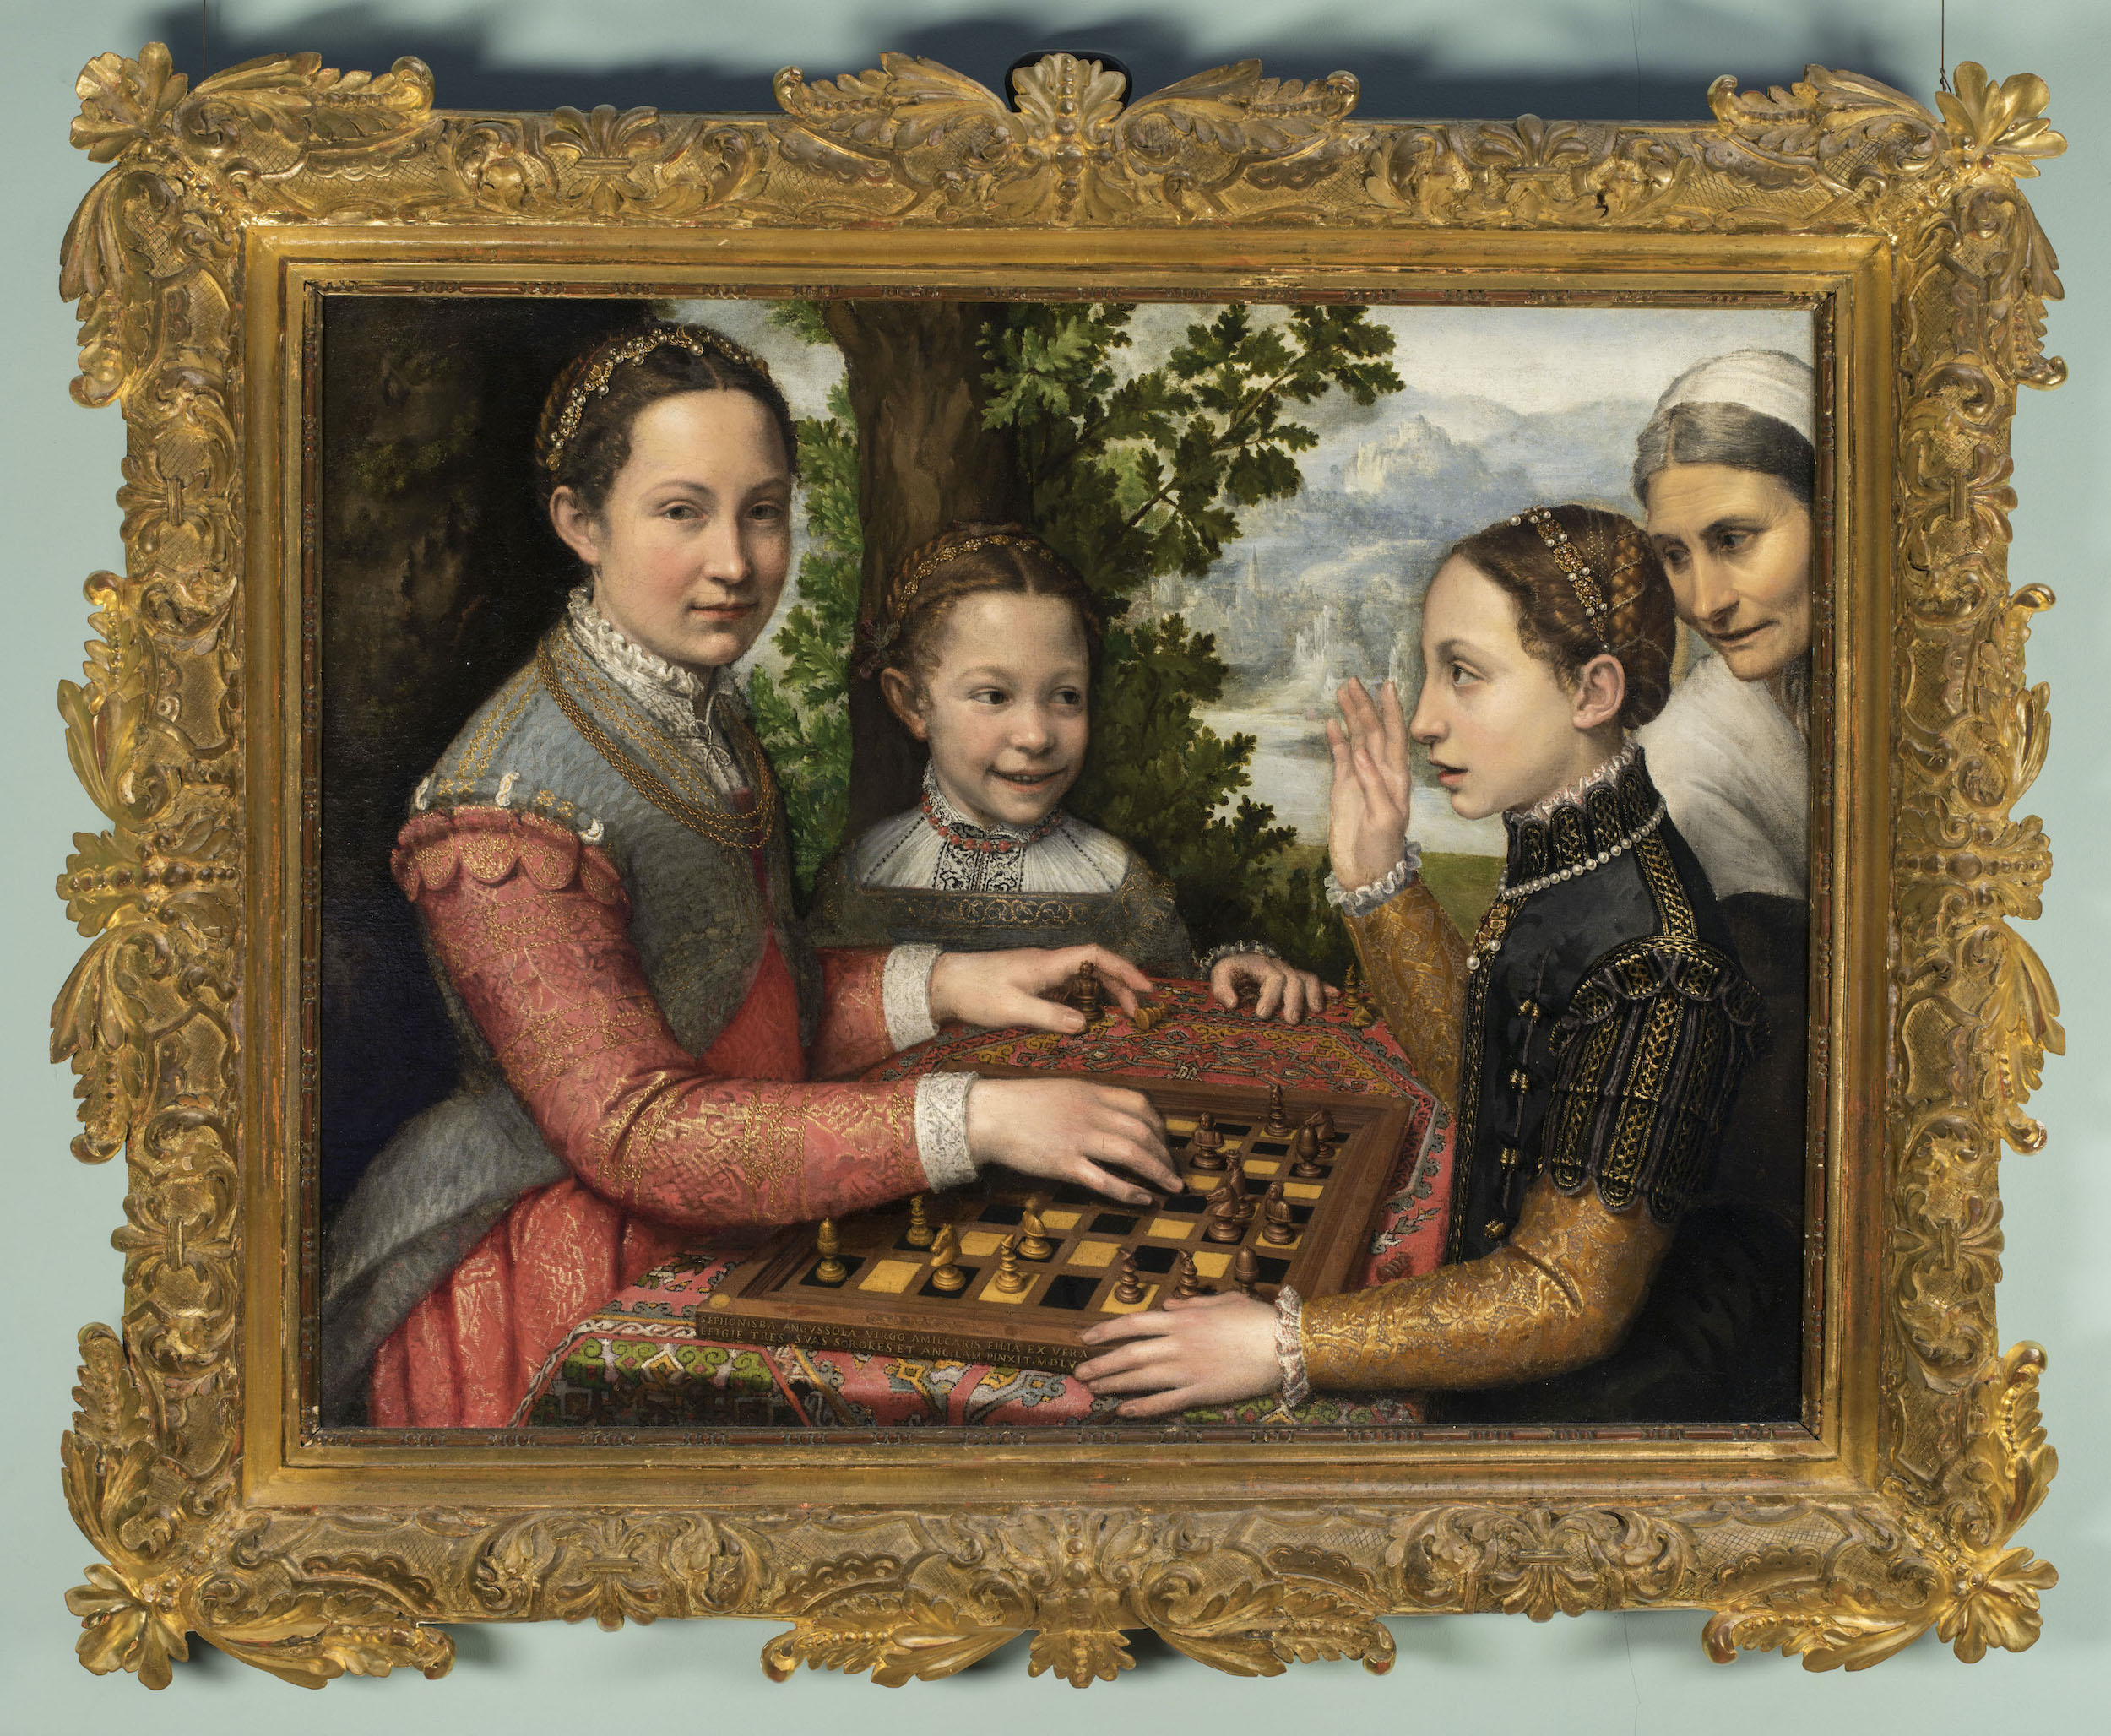 The Chess Game by Sofonisba Anguissola - 1555 - 72 × 97 cm National Museum in Poznan